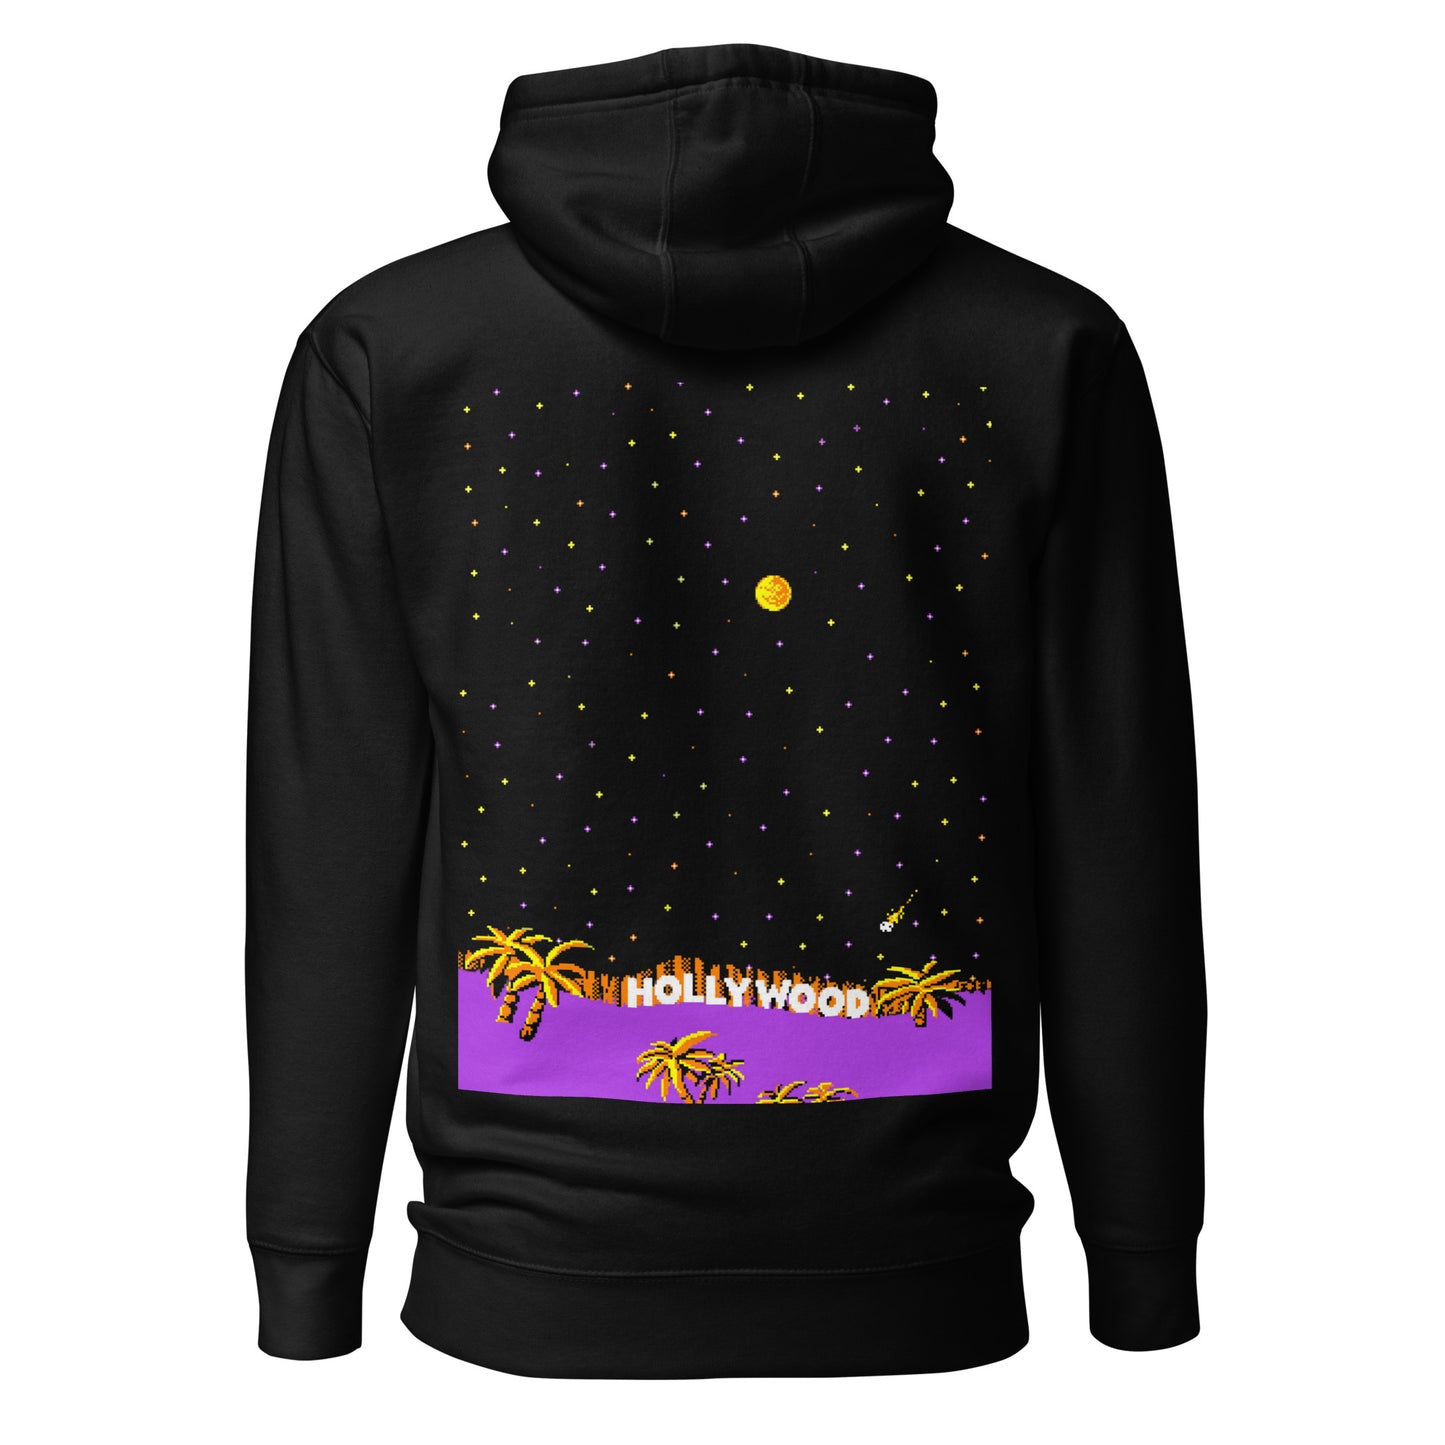 Embroidered Large Center, Printed Back Unisex Hoodie / Hooded Sweatshirt "Hollywood"